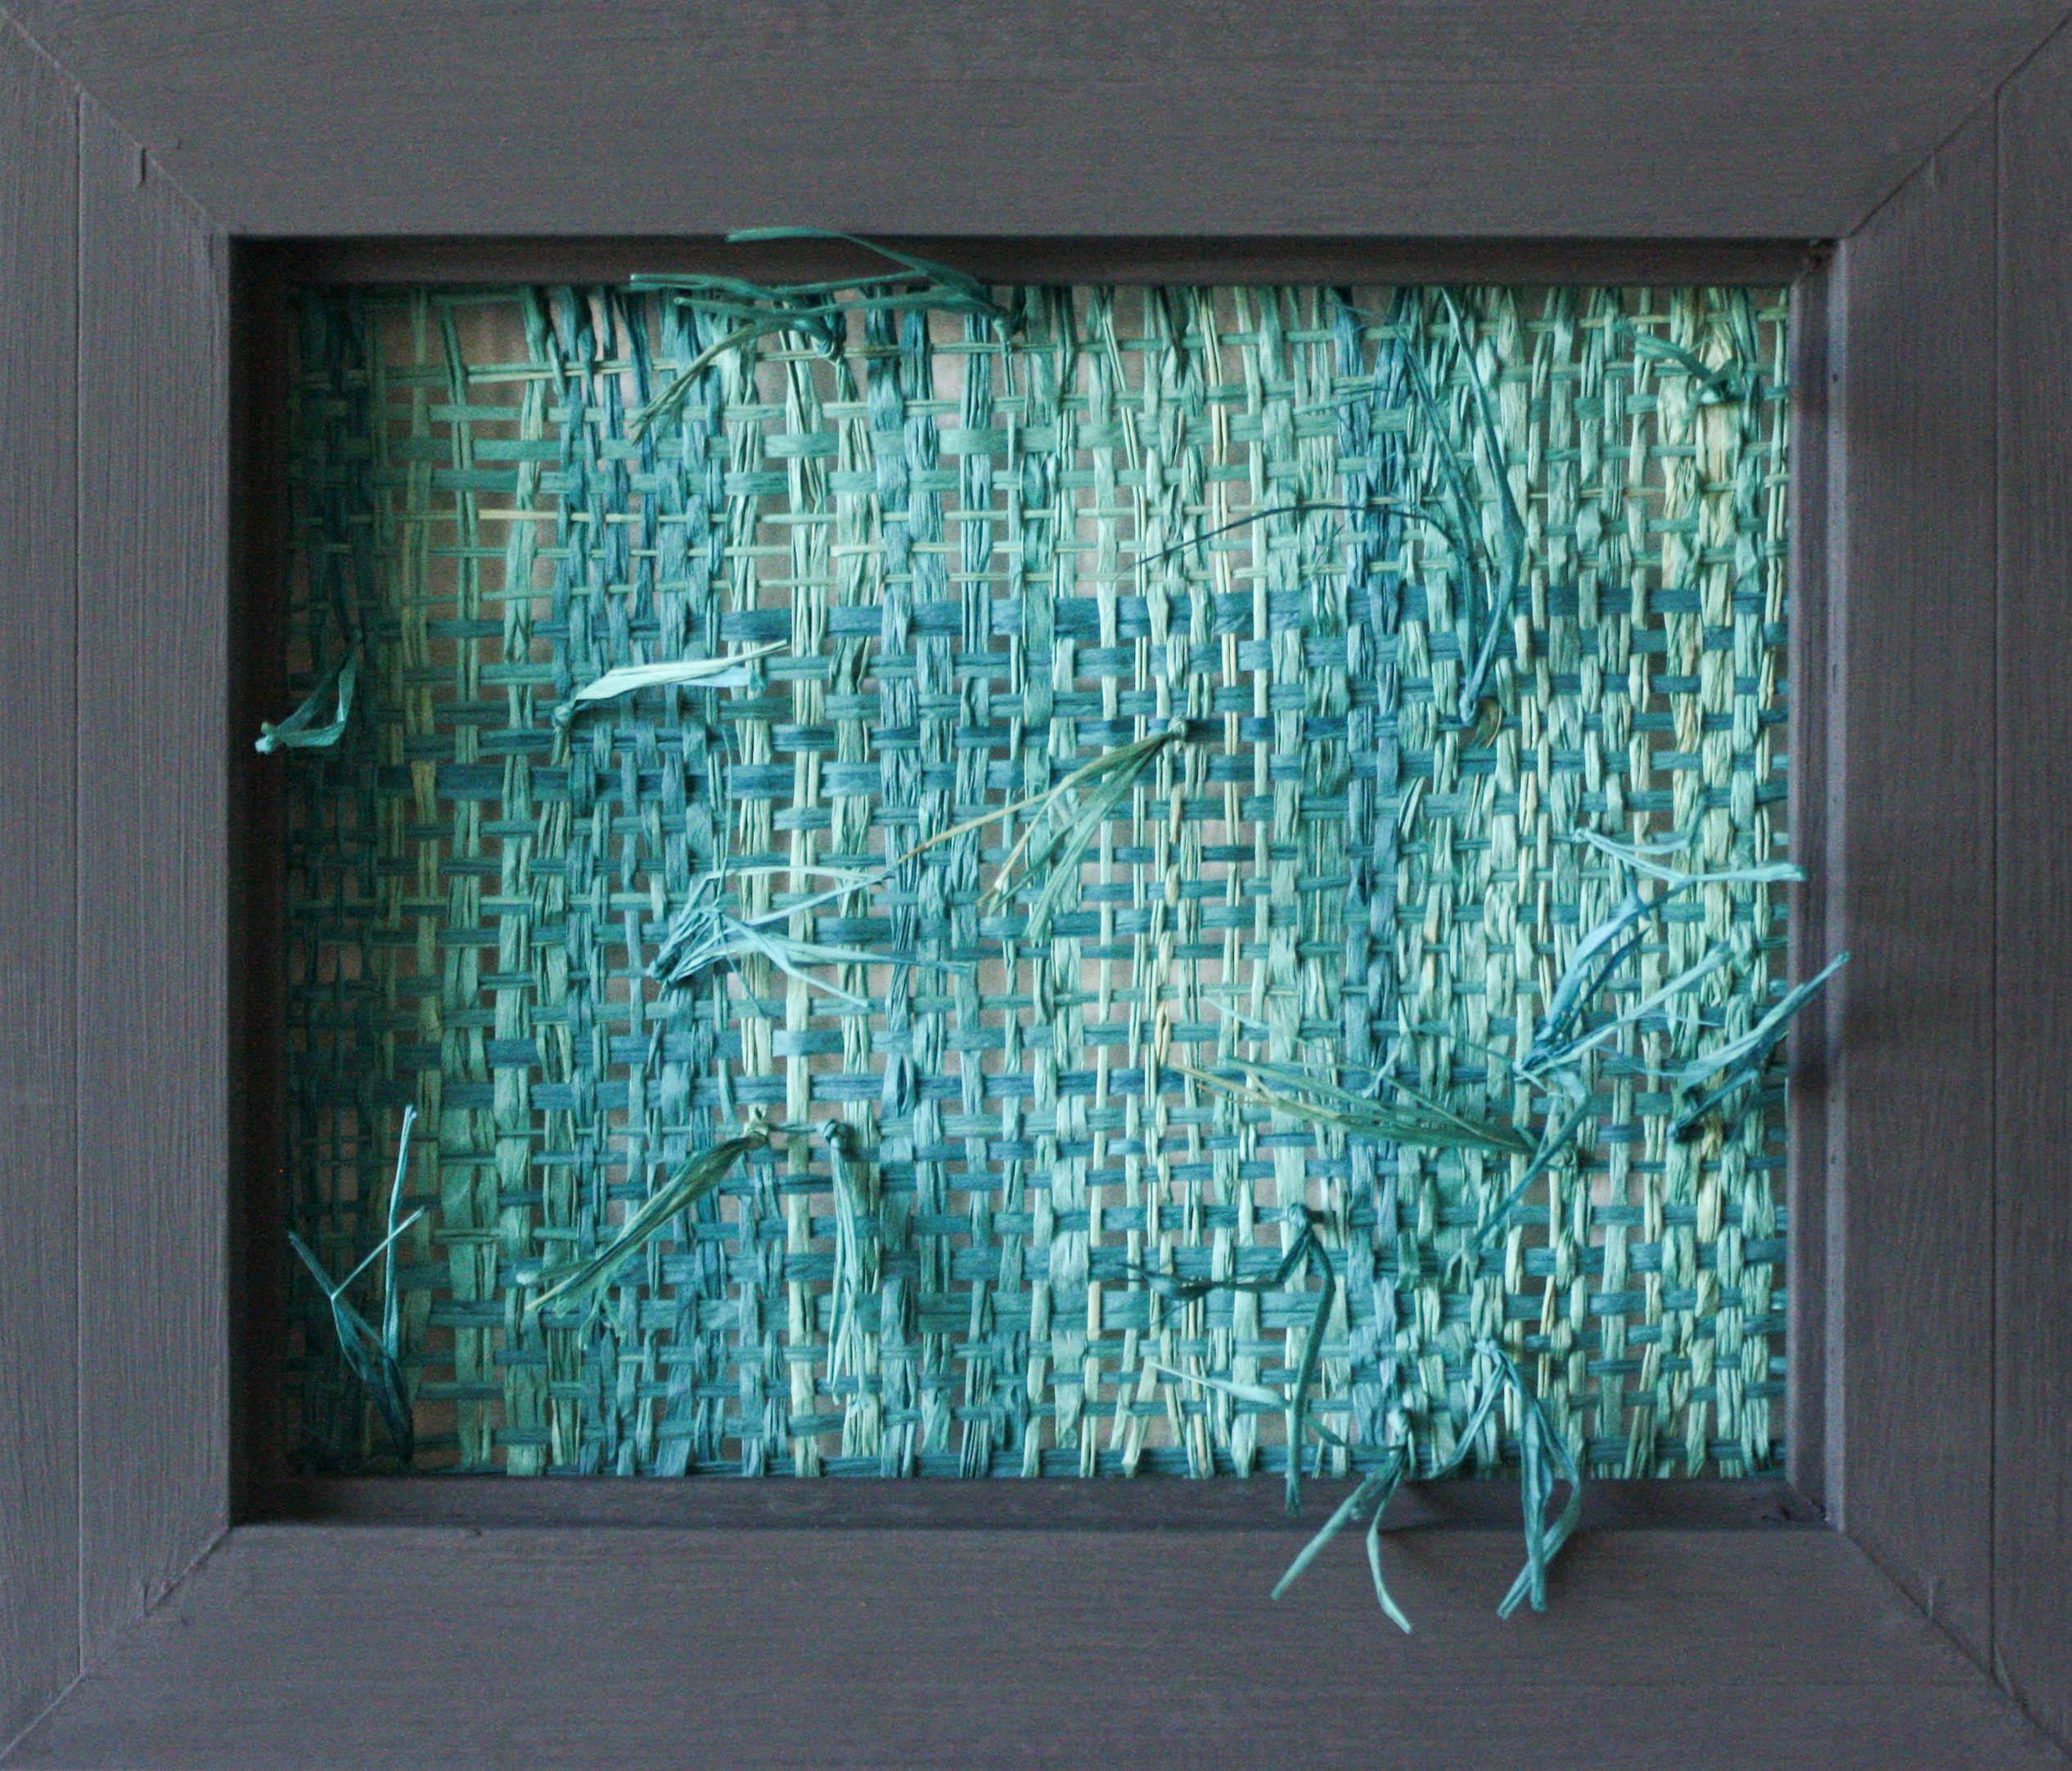 This woven sculptural wall hanging is created using blue raffia mounted inside a wooden frame. Its organic nature is complemented by a few loose pieces that break out of the rectangular scope of the frame.